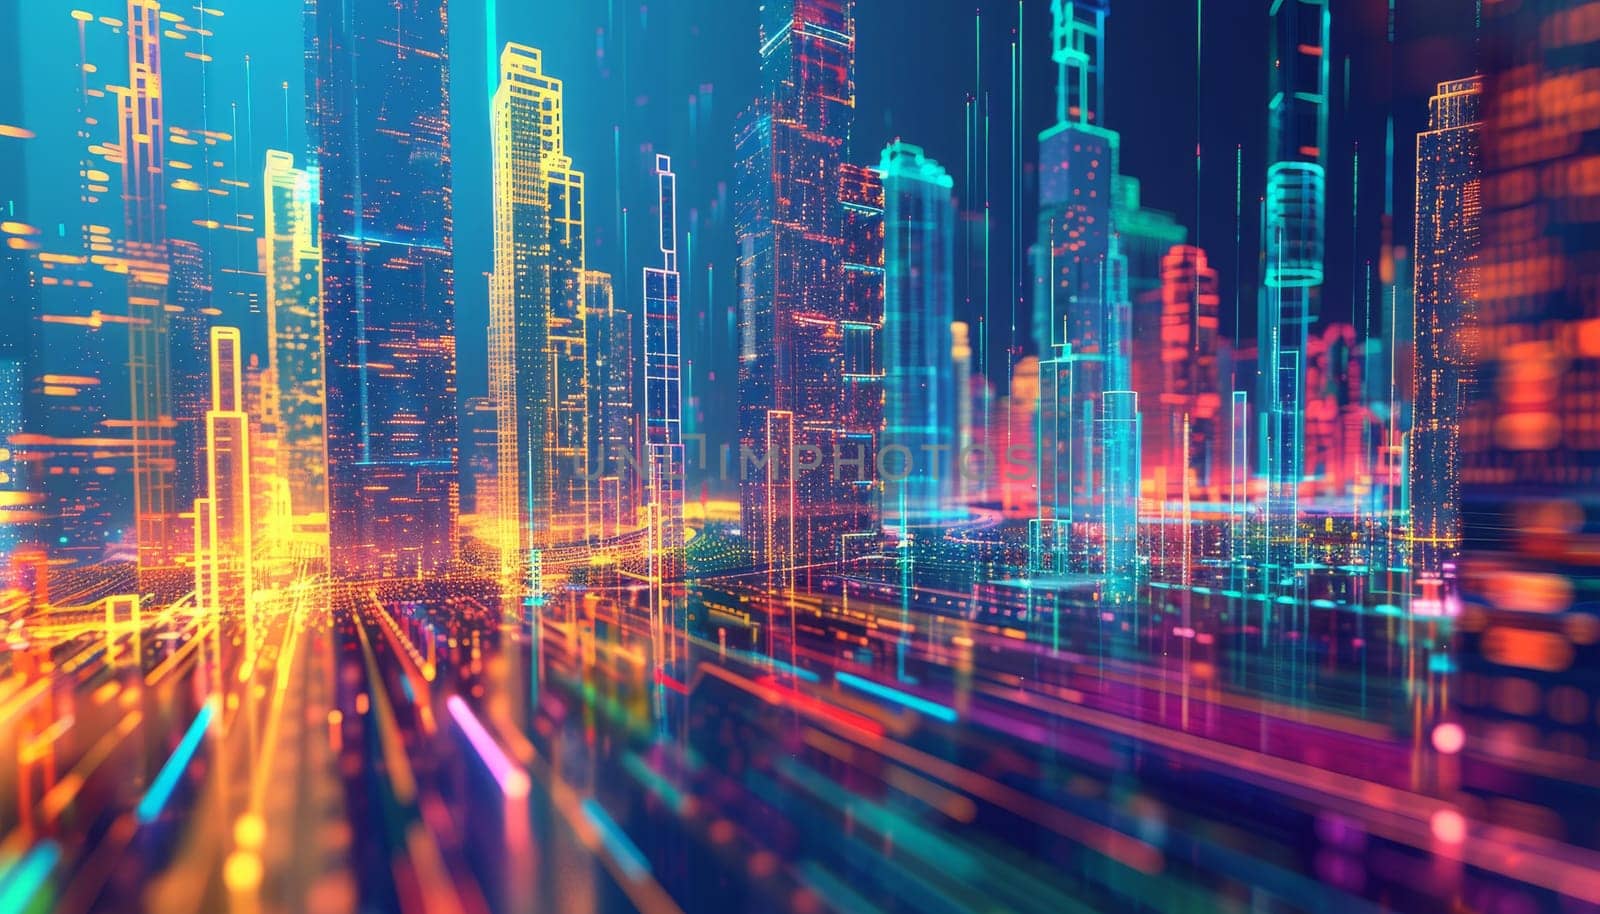 A cityscape with a bright orange line running through it by AI generated image.